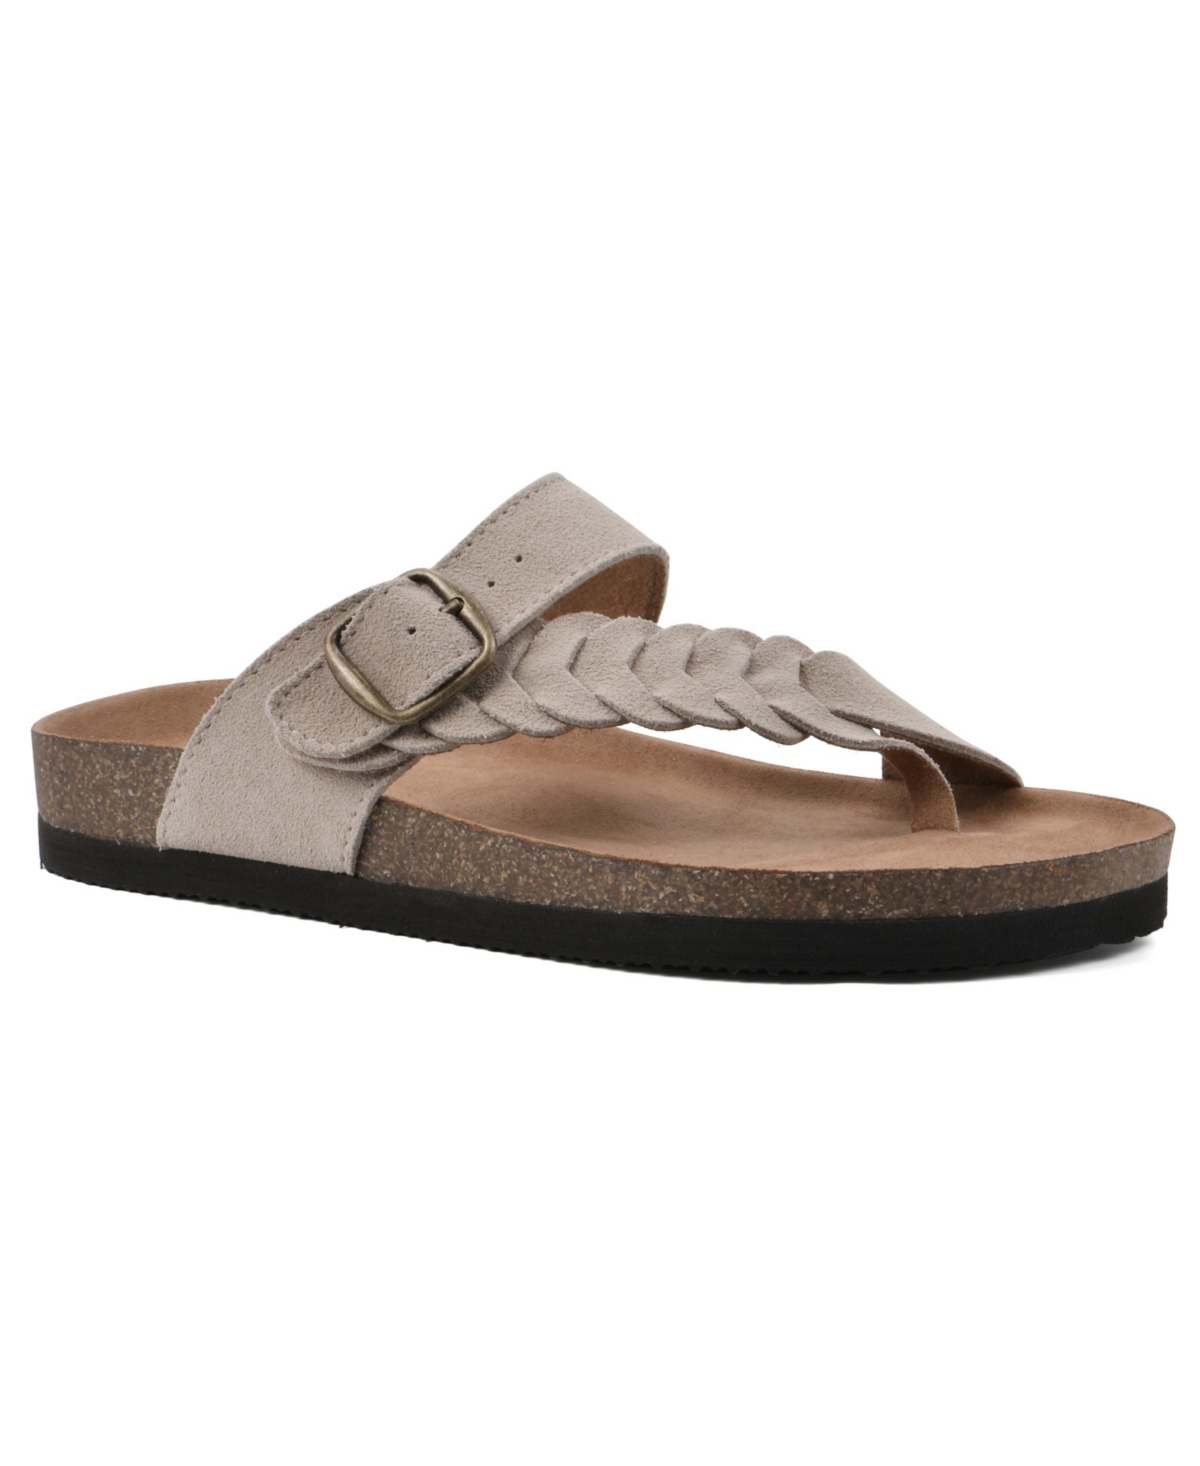 Women's Happier Footbeds Sandals - Brown, Leather